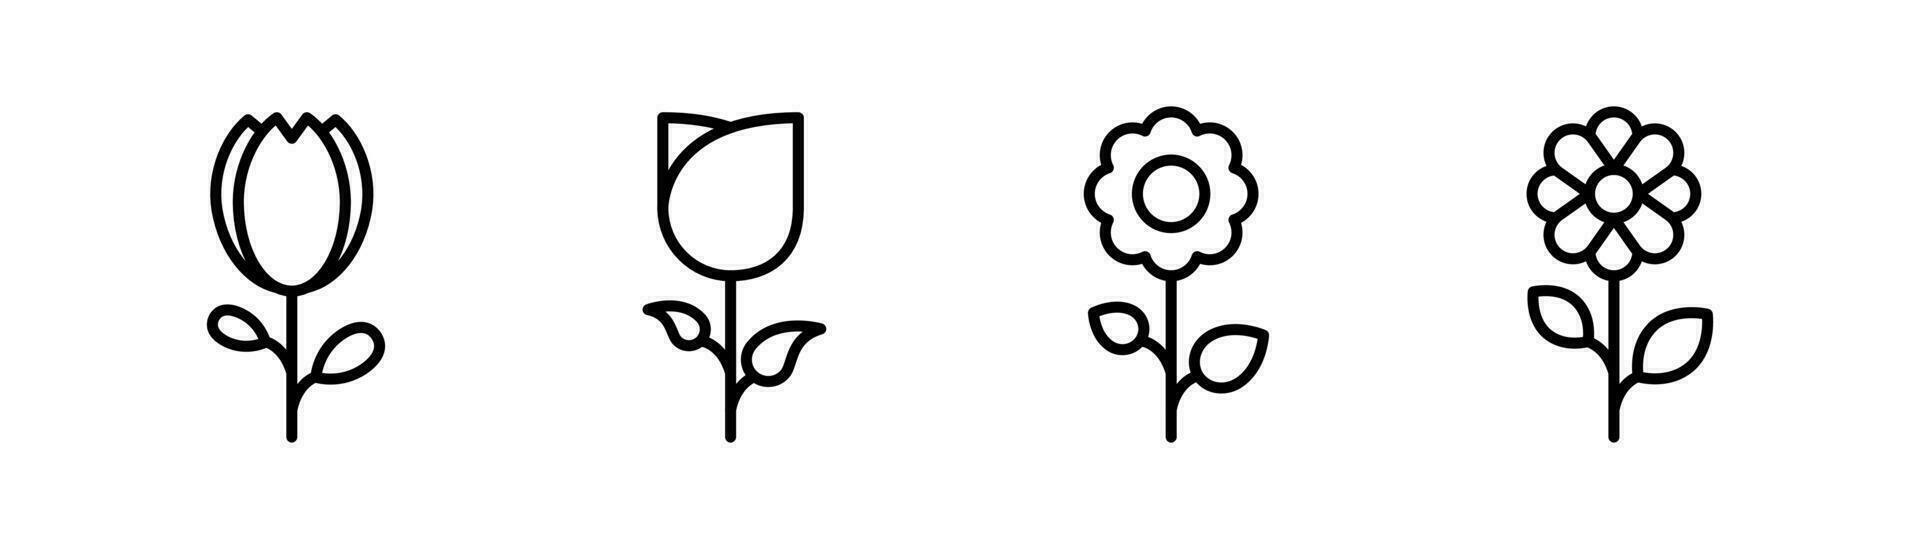 Flower icon in line. Flower icons set. Outline chamomile and rose symbol. Floral plant collection. Flowers icon in line. Stock vector illustration